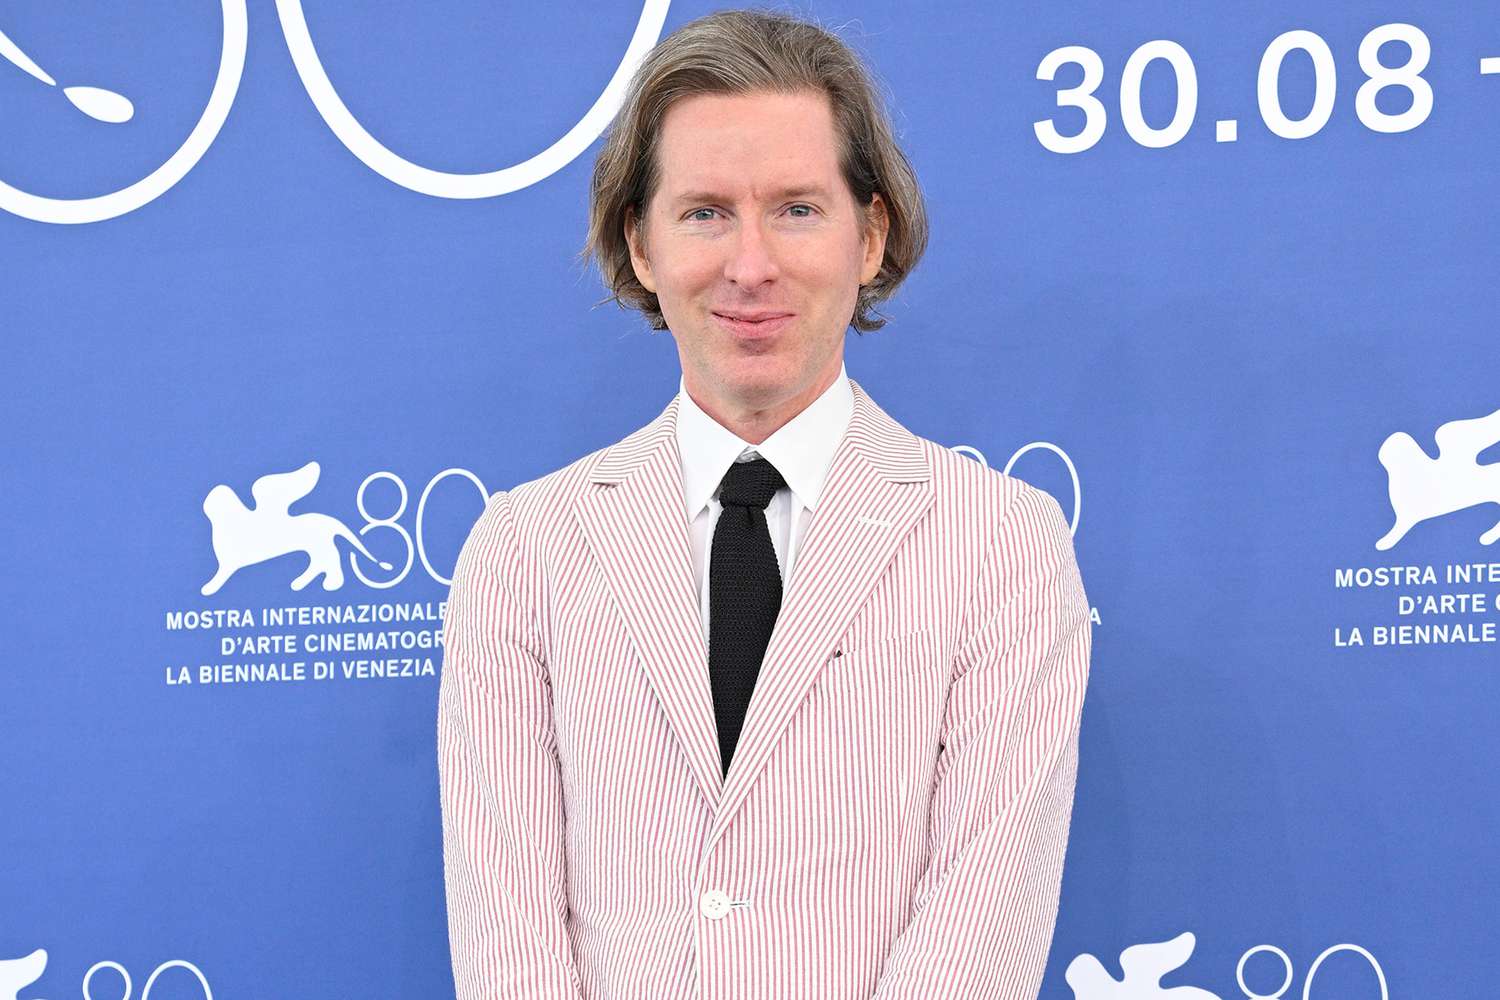 Wes Anderson criticizes editing of Roald Dahl books: 'What's done is done'